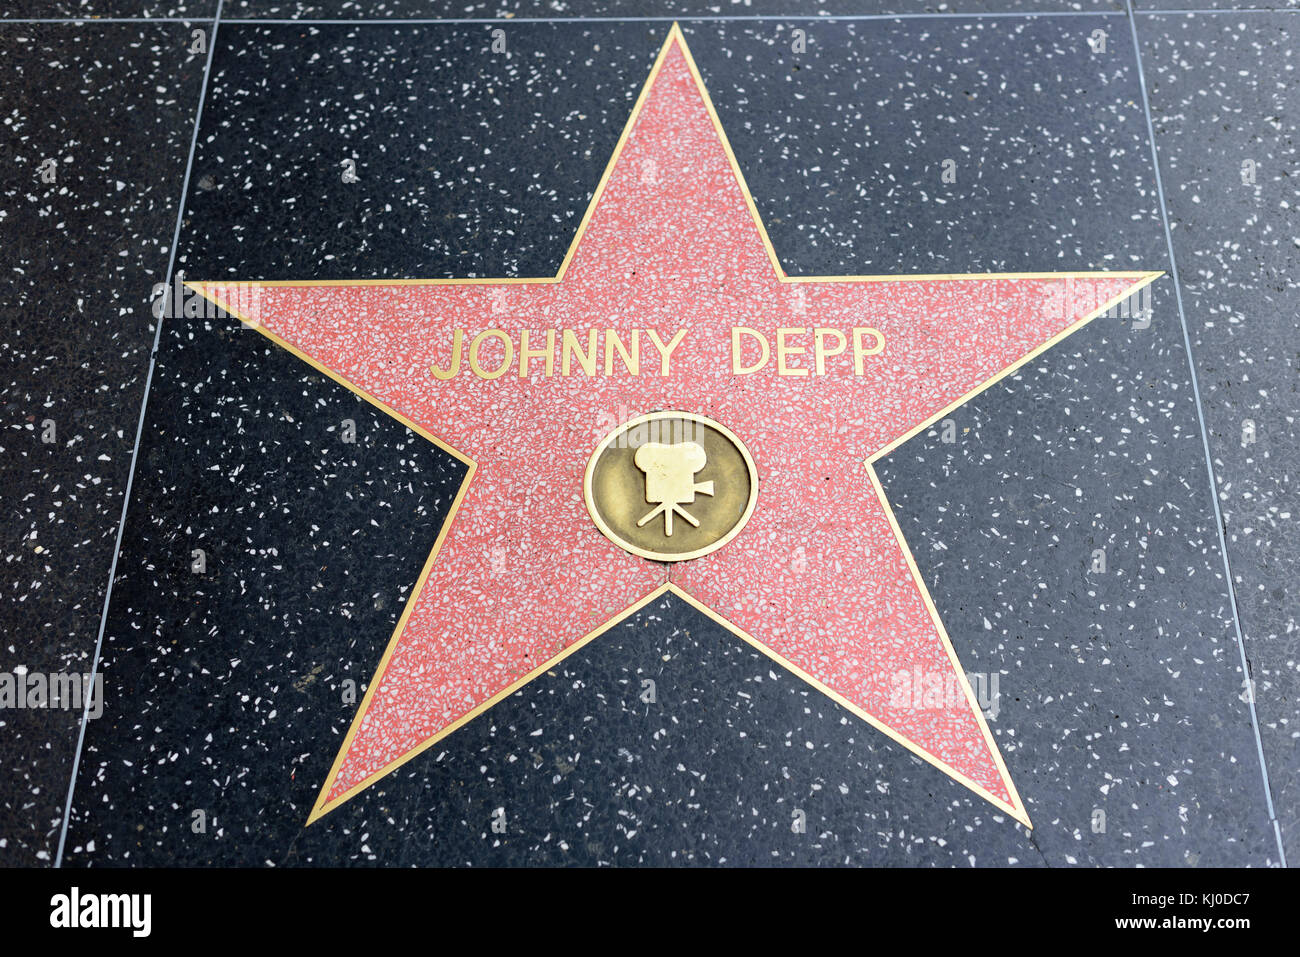 HOLLYWOOD, CA - DECEMBER 06: Johnny Depp star on the Hollywood Walk of Fame in Hollywood, California on Dec. 6, 2016. Stock Photo